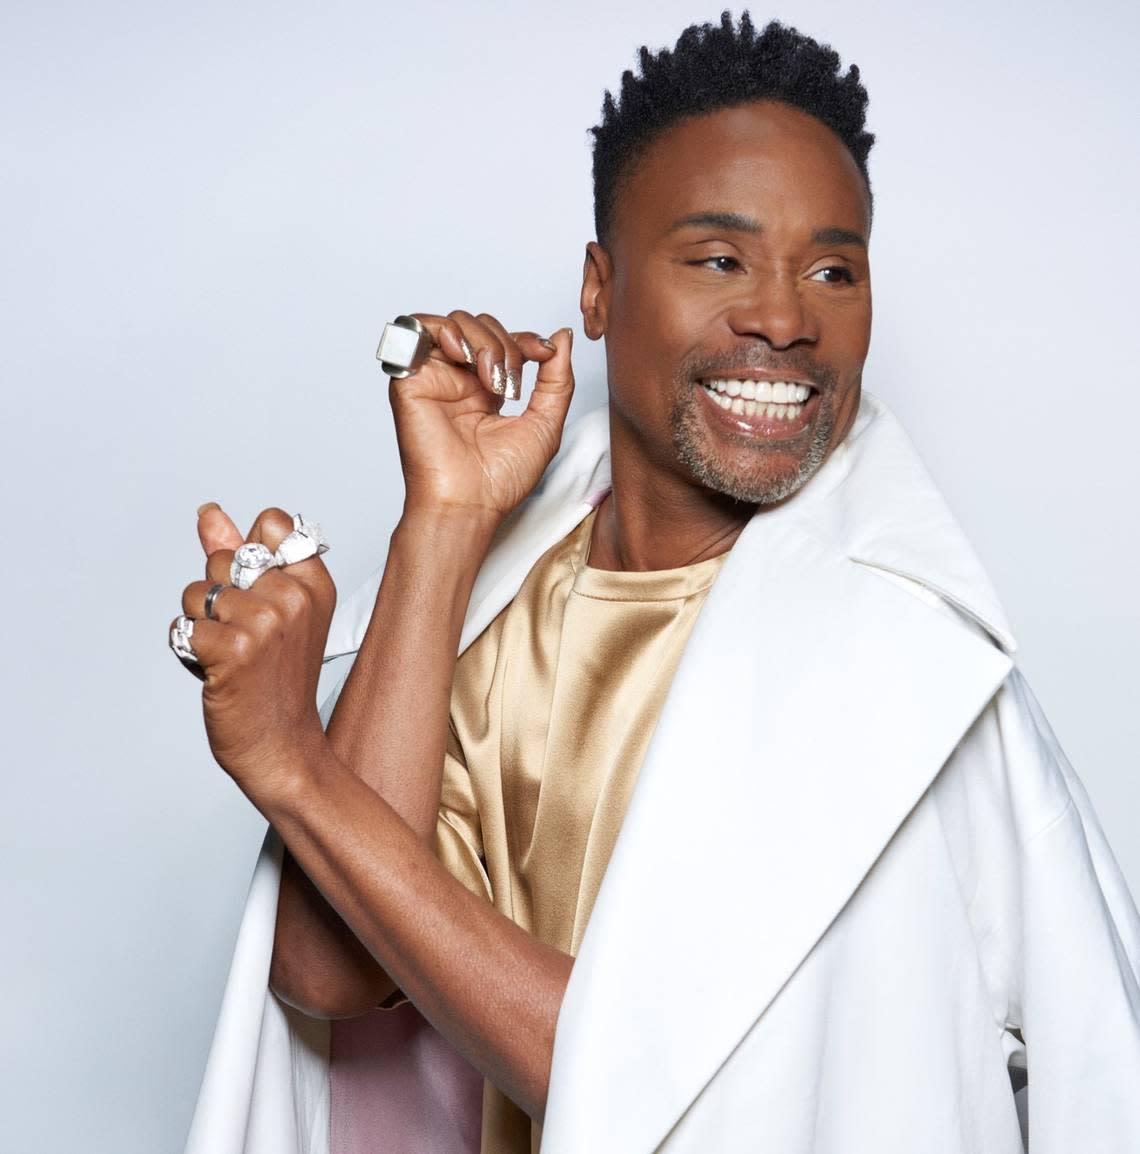 Emmy, Tony and Grammy award winner Billy Porter will appear in conversation with Ana Navarro of “The View” at Miami Book Fair.